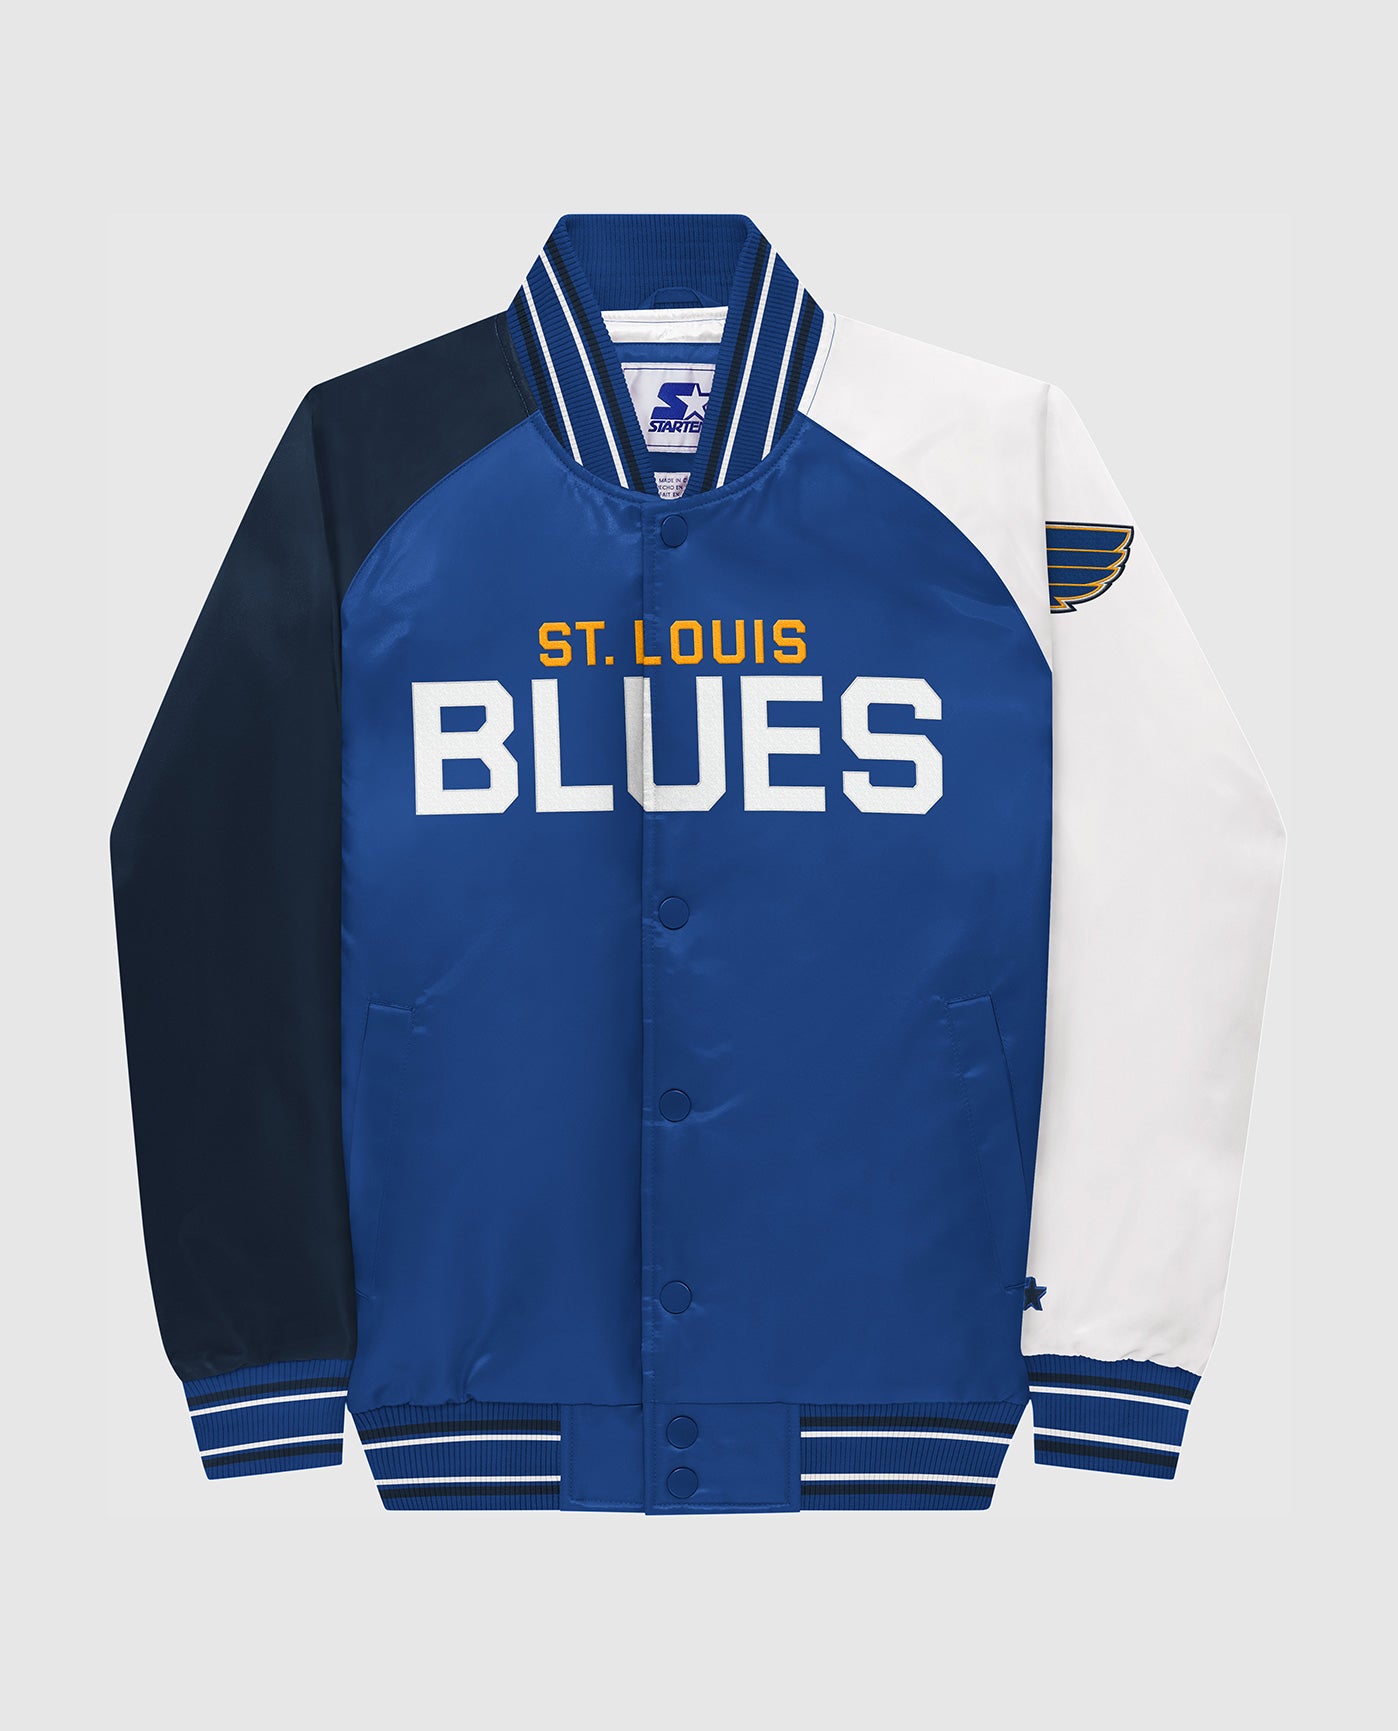 St. Louis Blues - All-Star gear is now available at STL